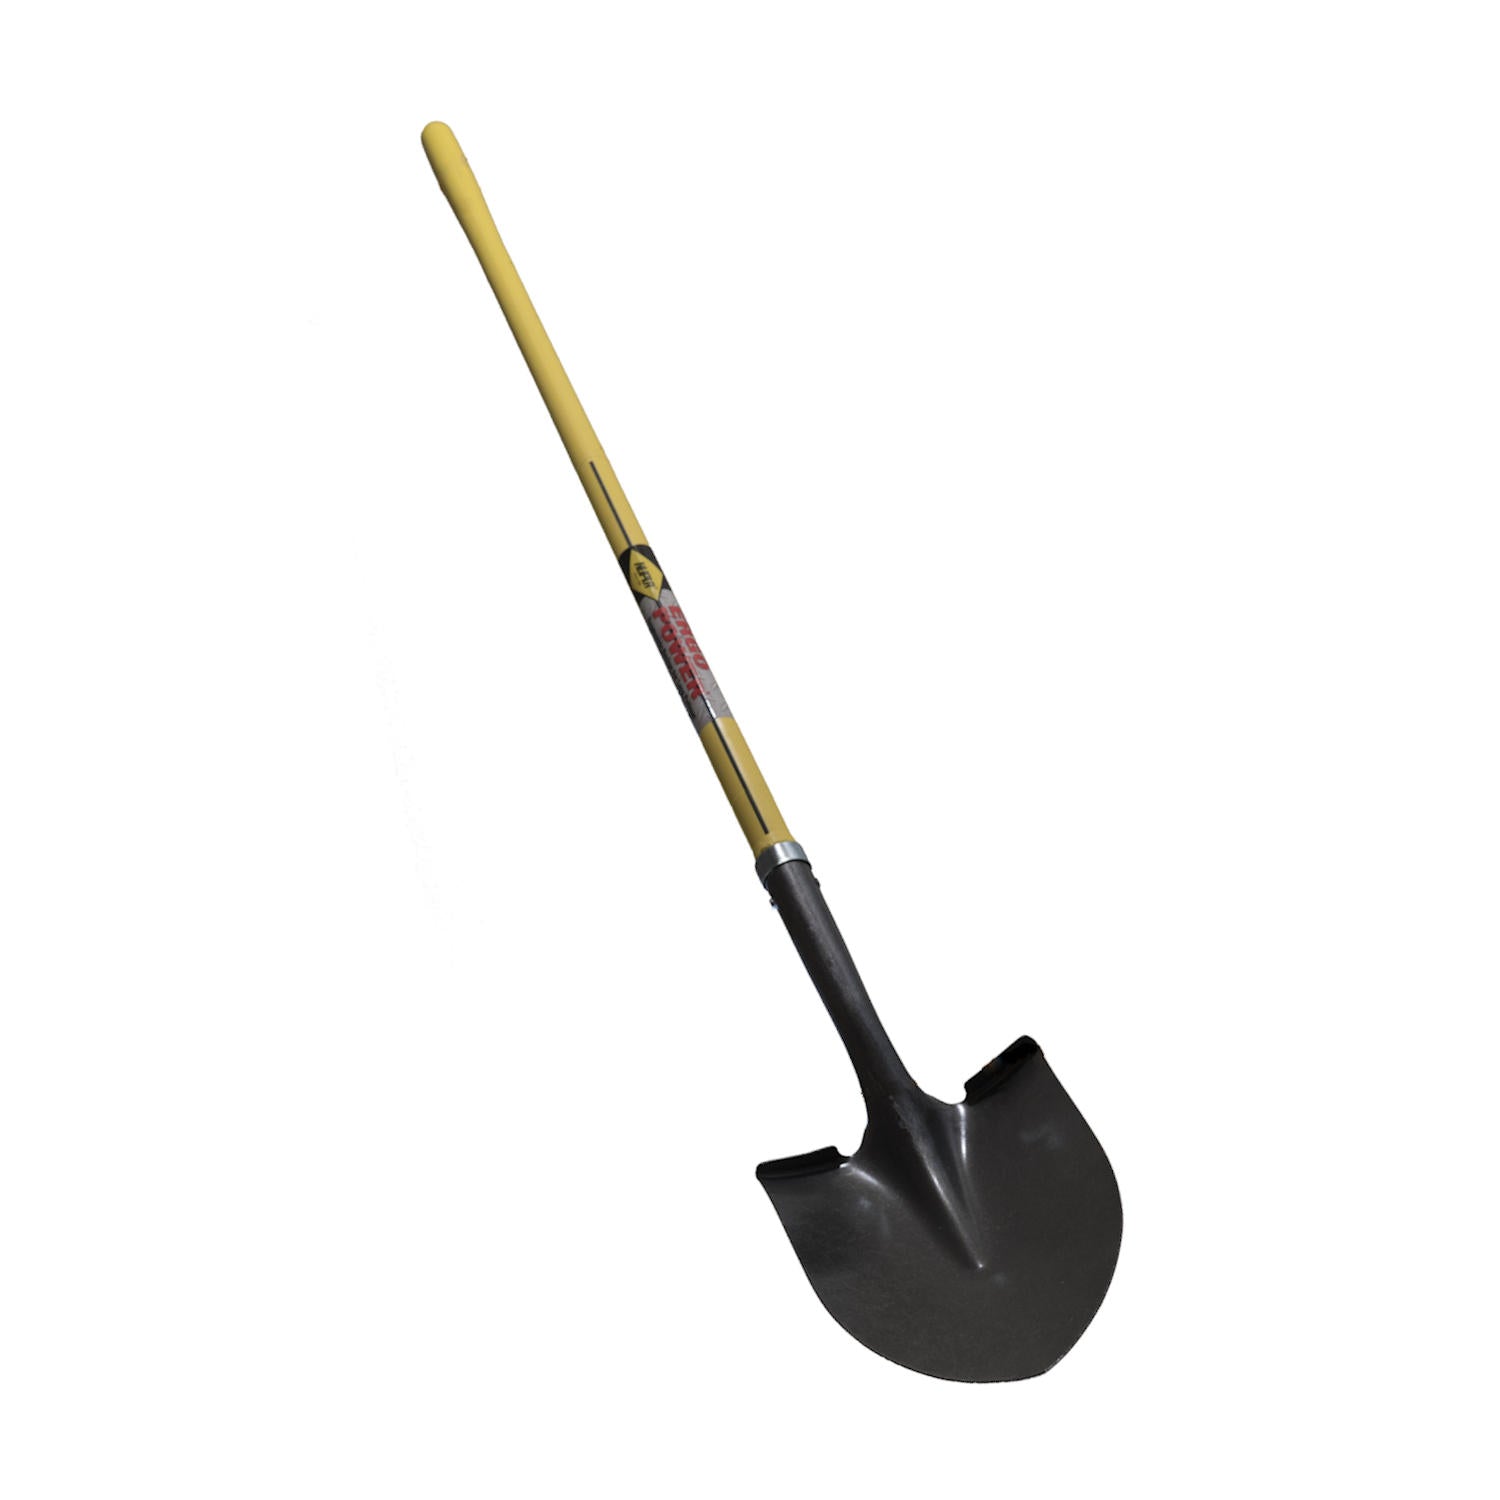 Nupla Nonconductive Round Point Shovel, 27 In. 6894317